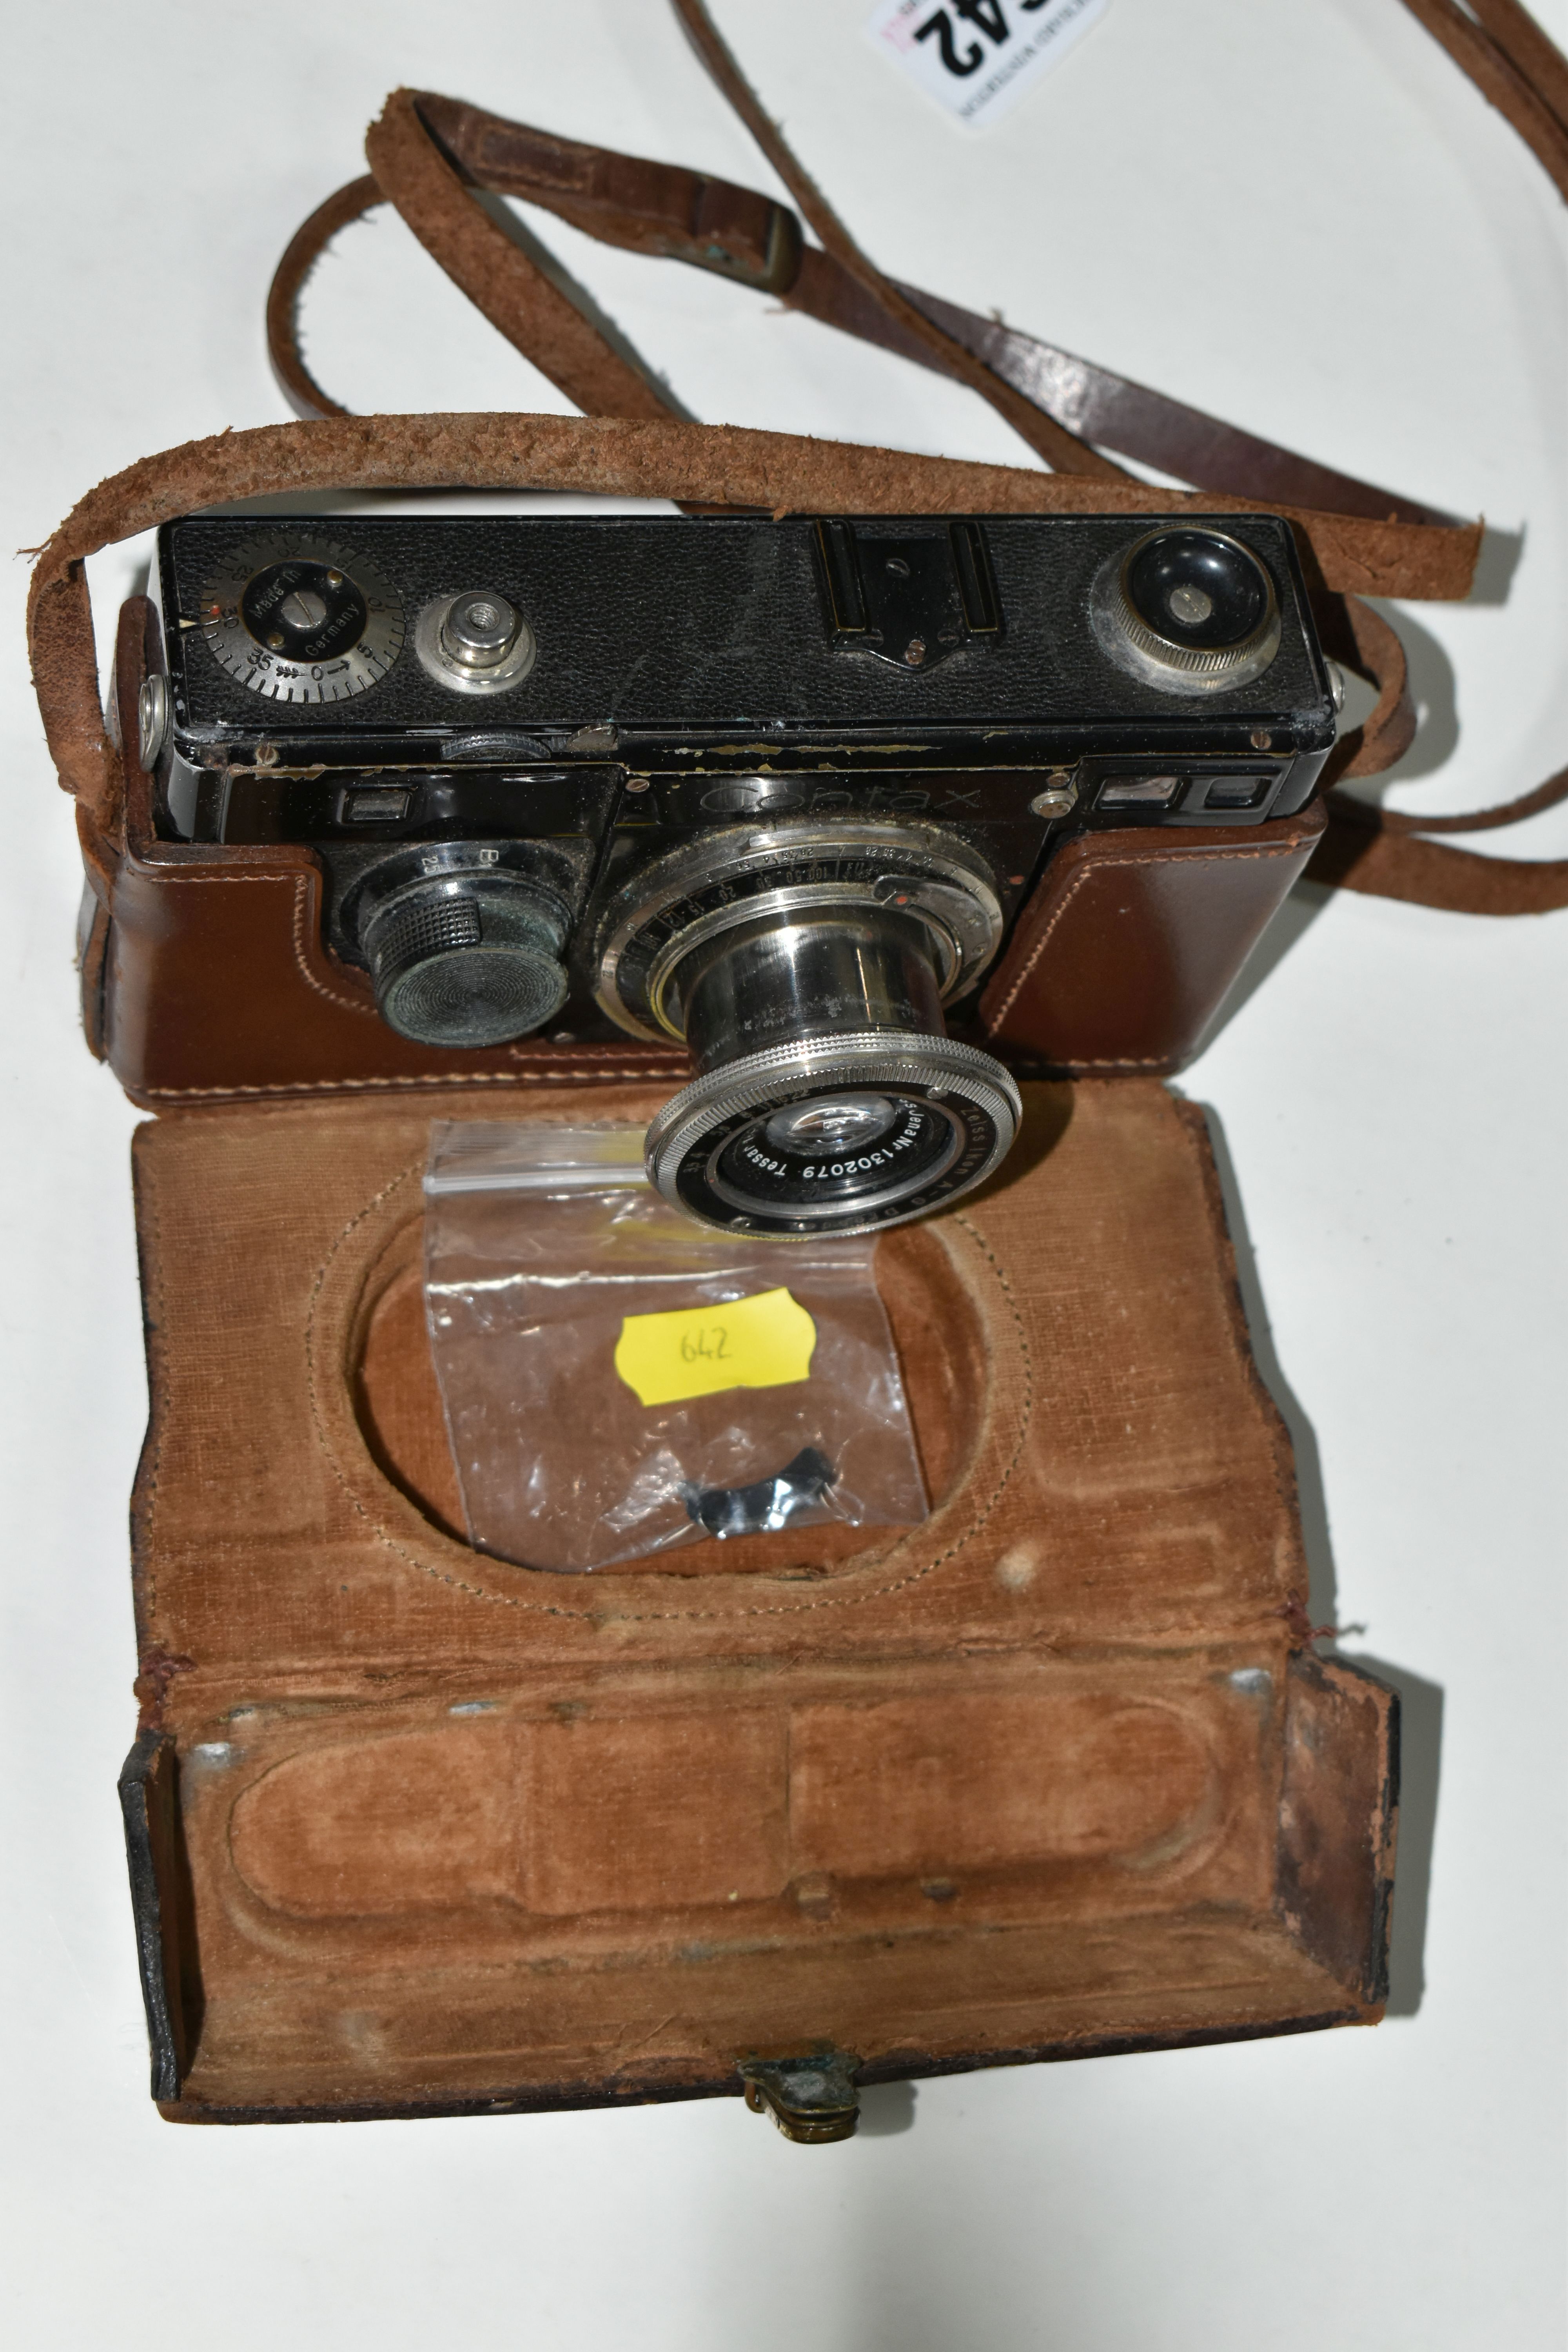 A ZEISS IKON CONTAX 1 FILM CAMERA, together with a Zeiss Ikon Jena 5cm f3.5 lens and leather case, - Image 3 of 5